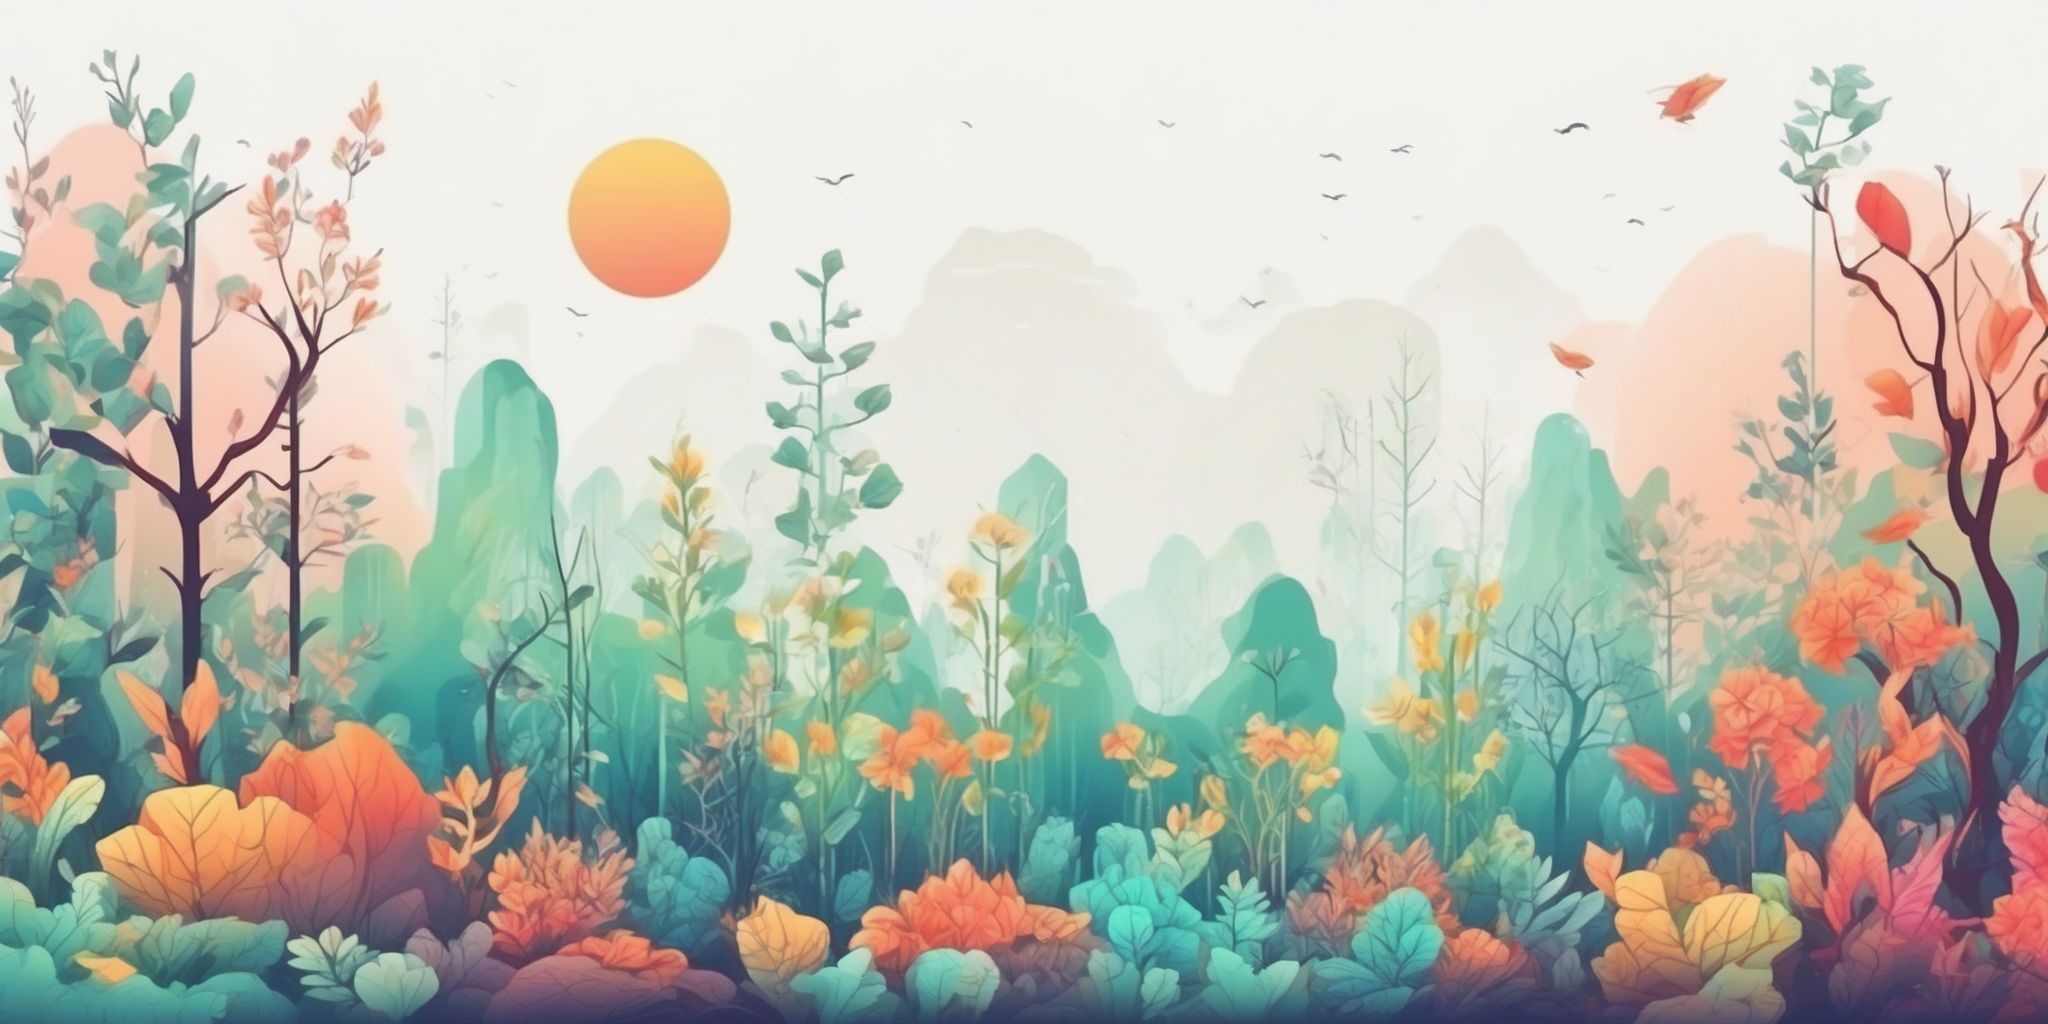 ecosystem in illustration style with gradients and white background